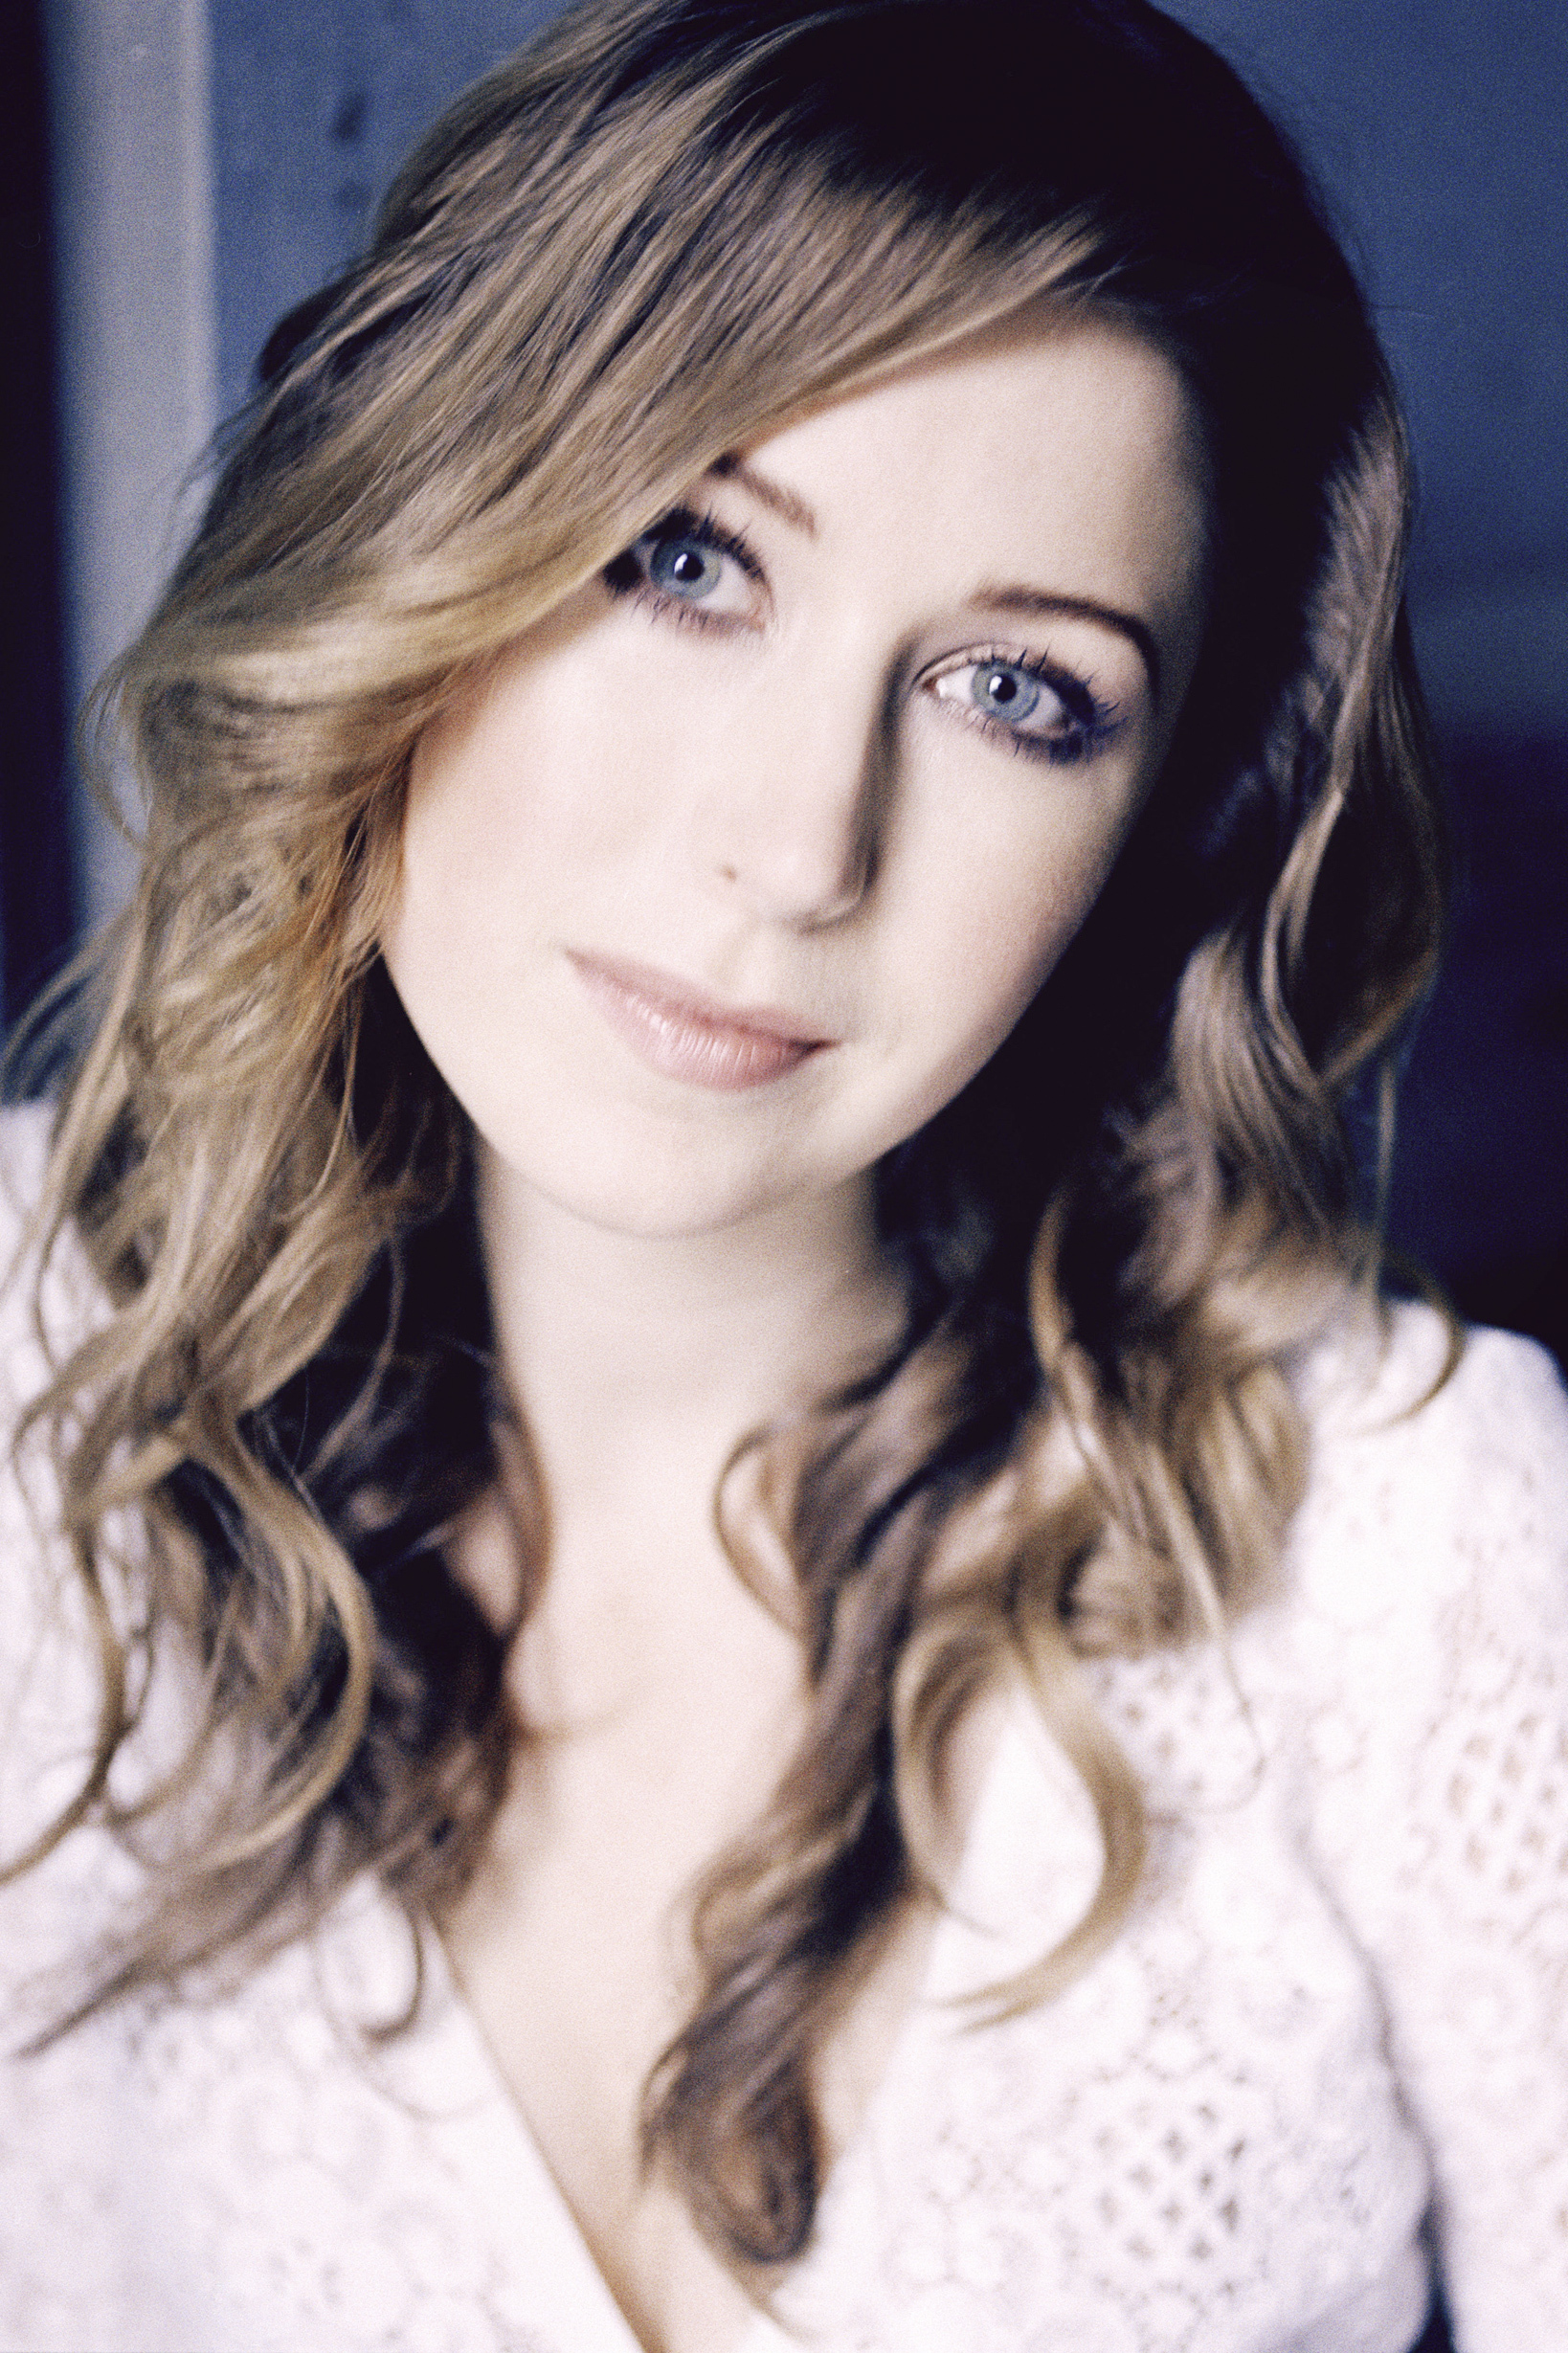 10 Best images about Hayley on Pinterest Hayley westenra, New zealand and C...